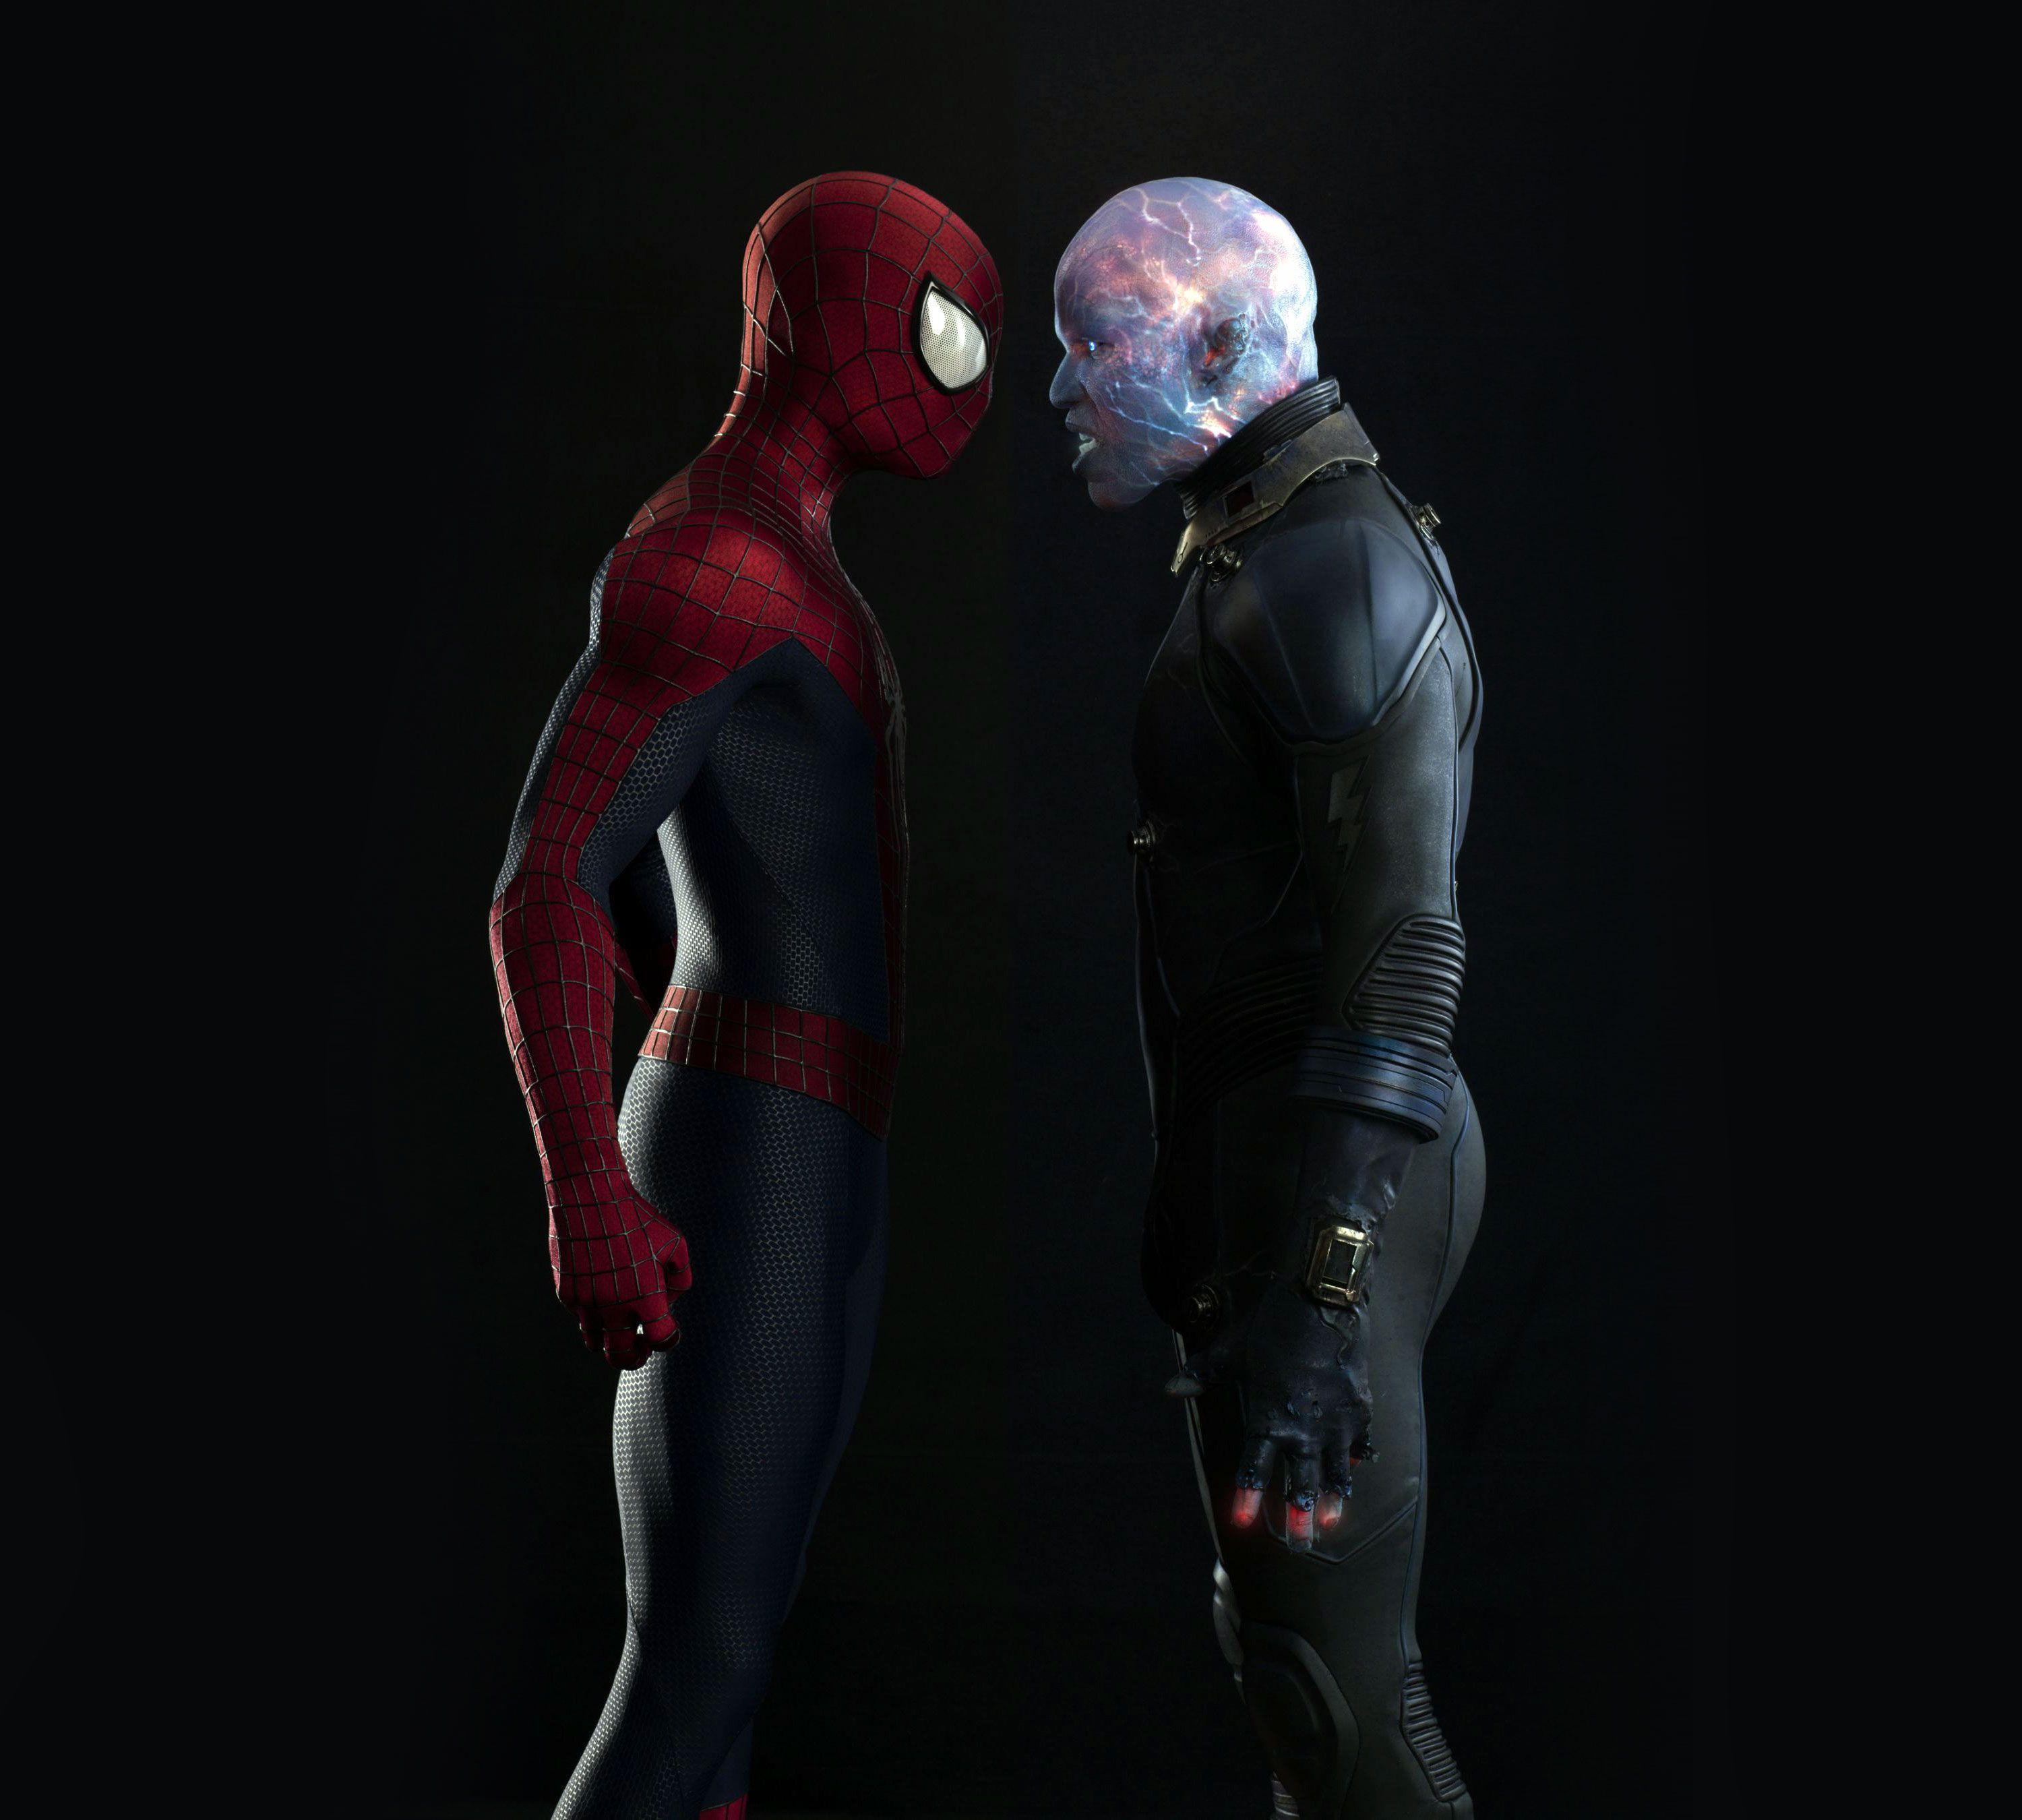 The Amazing Spider Man 2 Wallpaper [HD] & Facebook Cover Photo